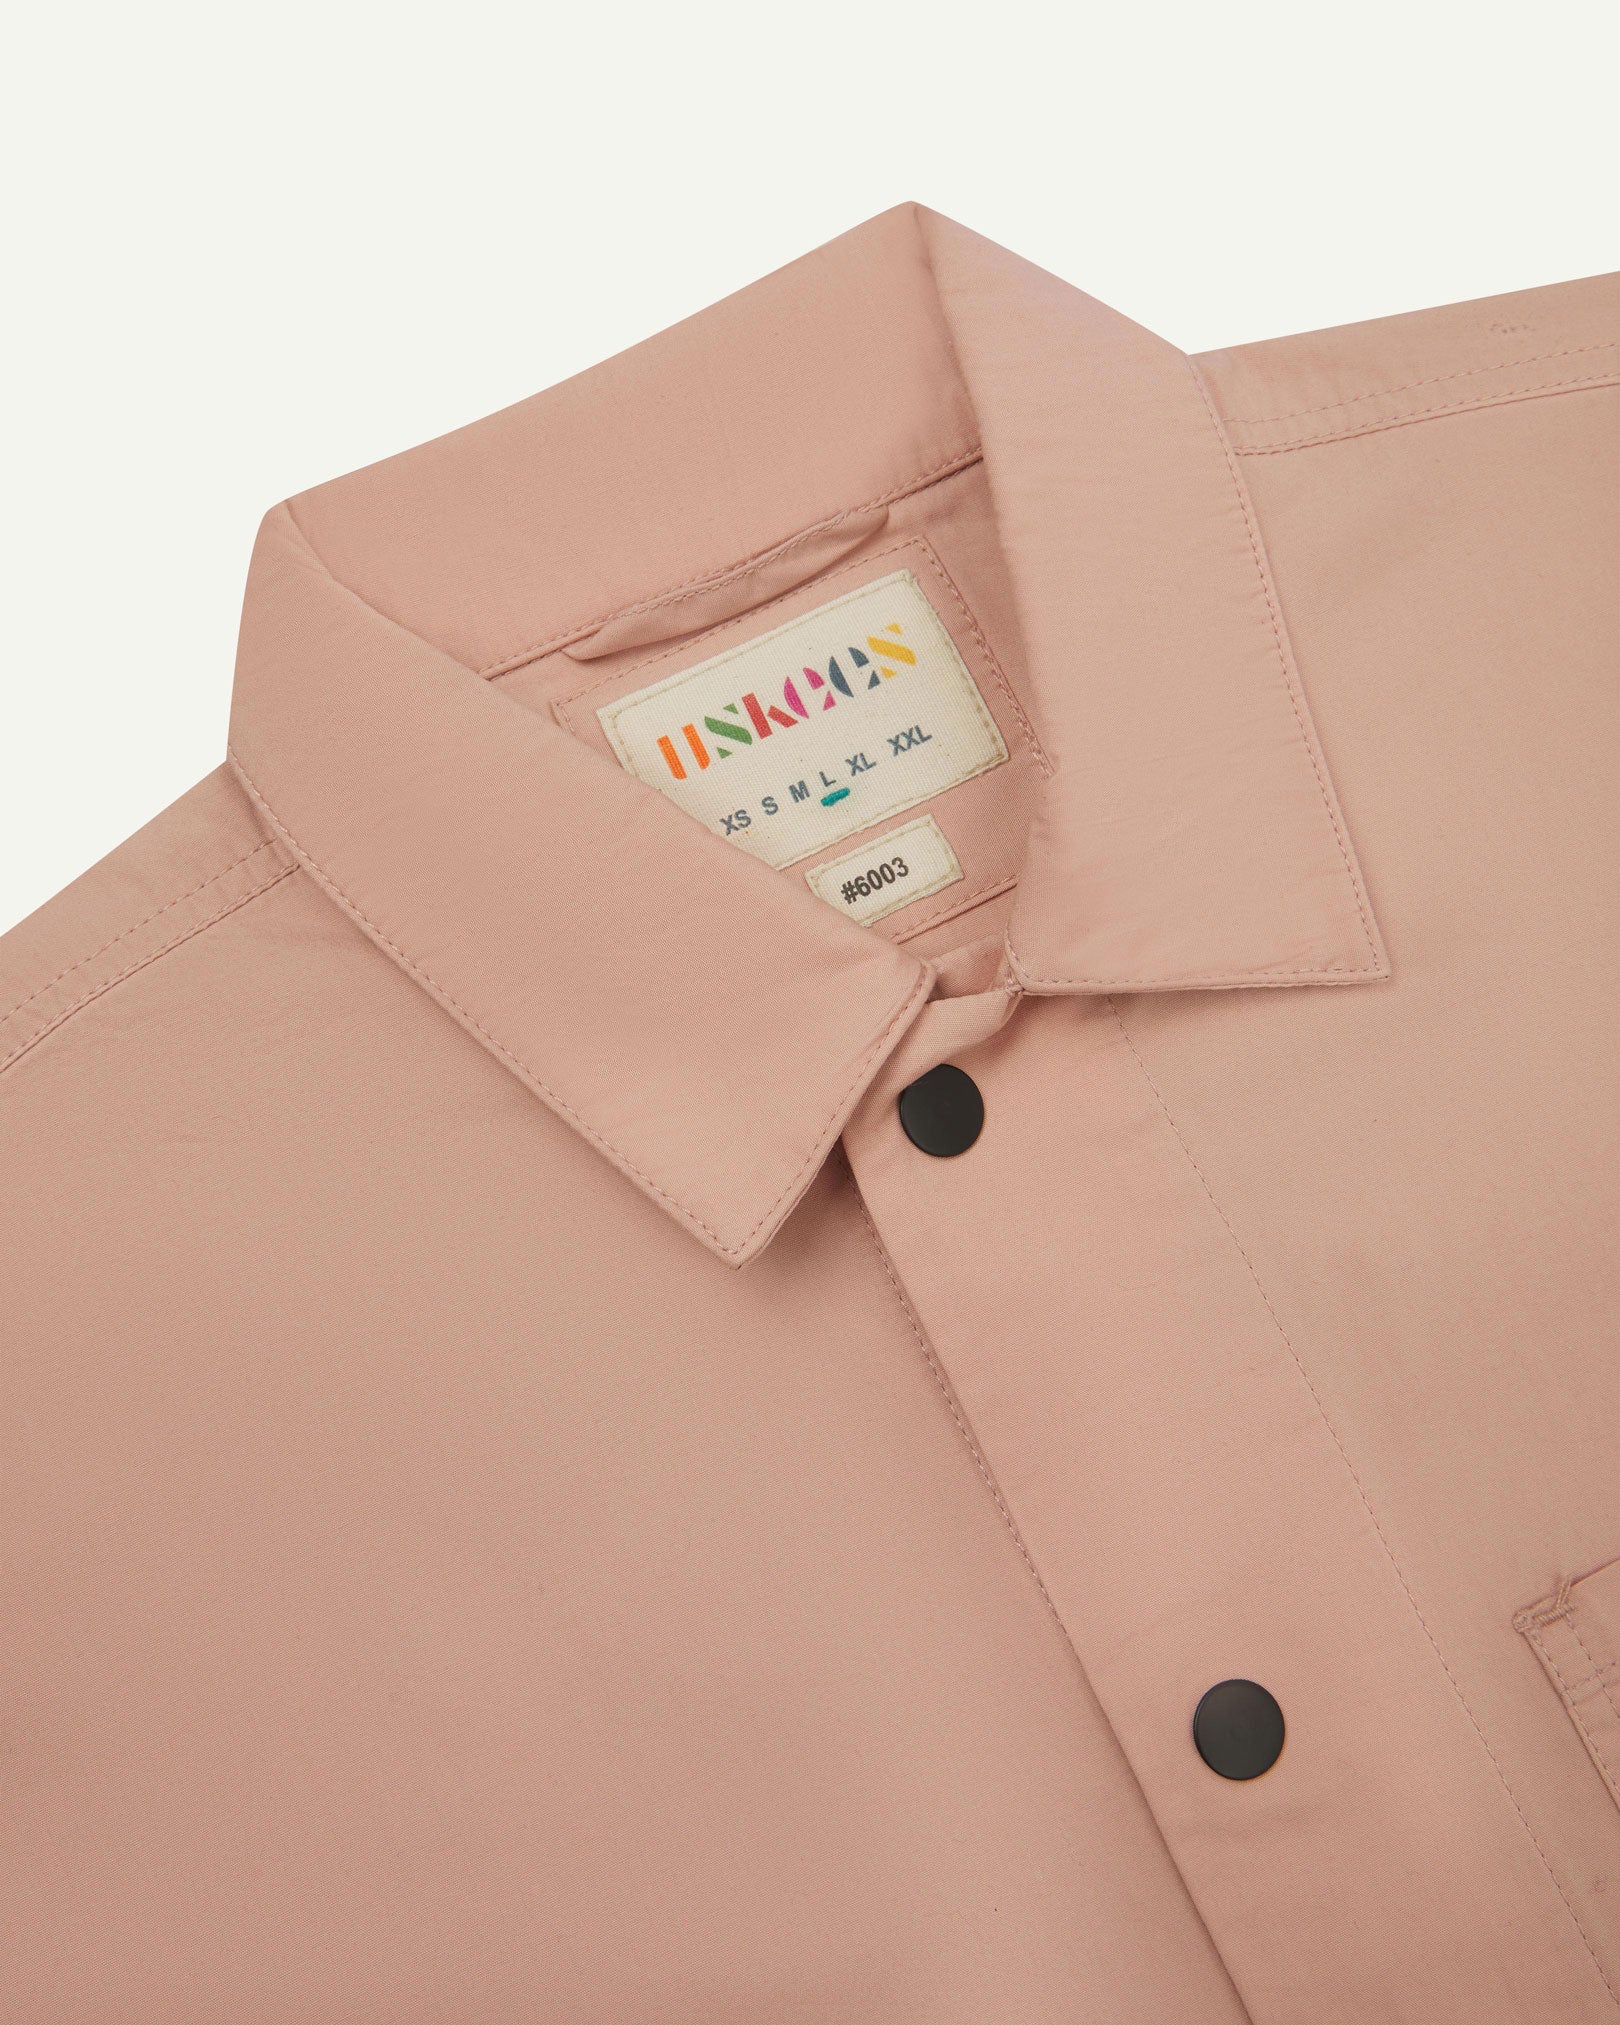 Close-up view of the #6003 reinforced shirt collar, showing weave of dusty pink organic cotton, contrast press studs and Uskees branding label.